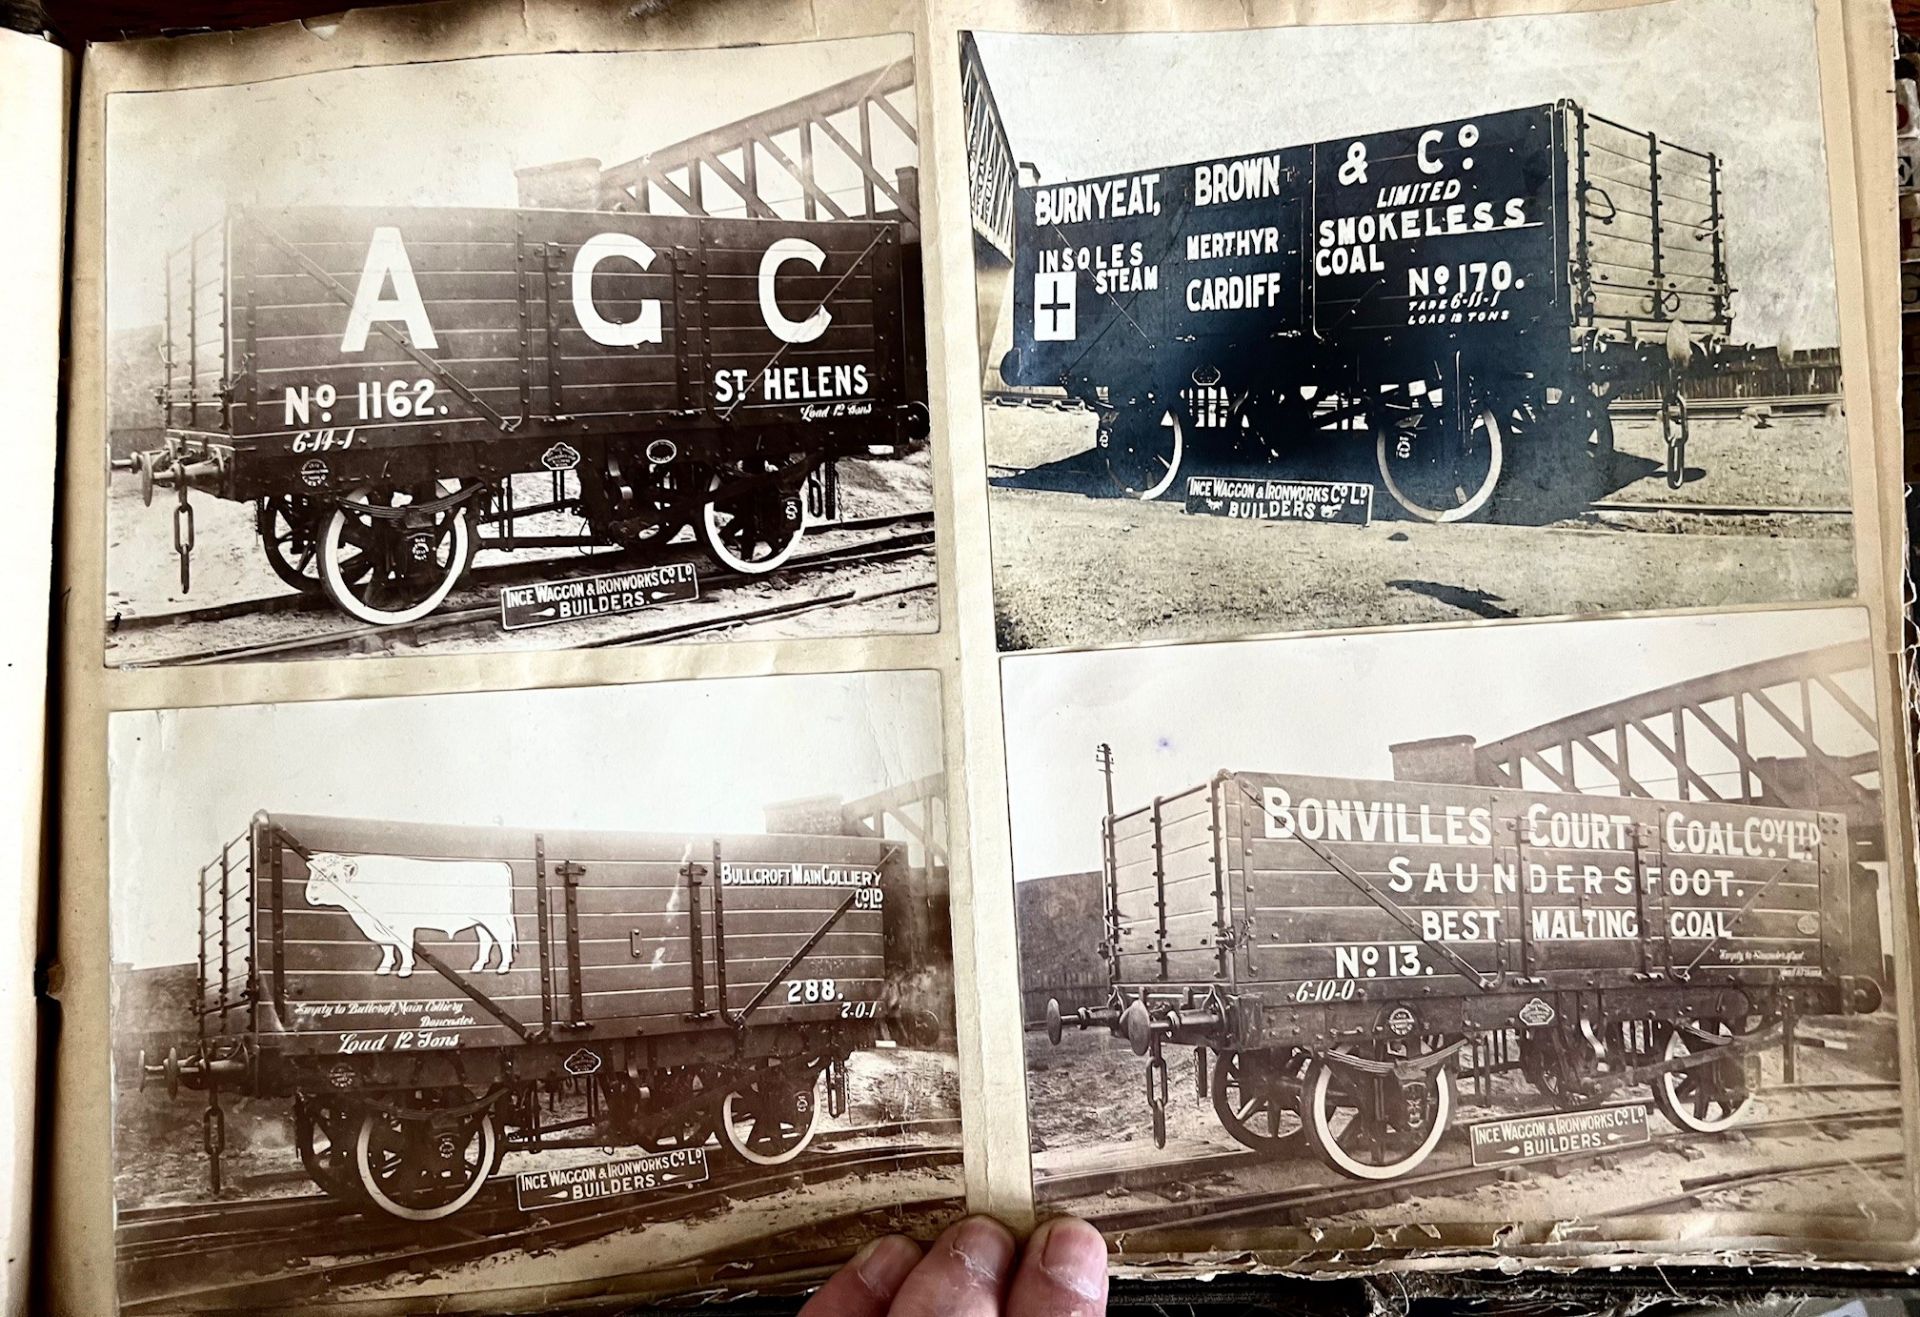 BRITISH RAIL ACCOUNTING RECORD BOOK 1958, ALSO AN ALBUM CONTAINING POSTCARDS, PHOTOS, RAILWAY - Image 3 of 10